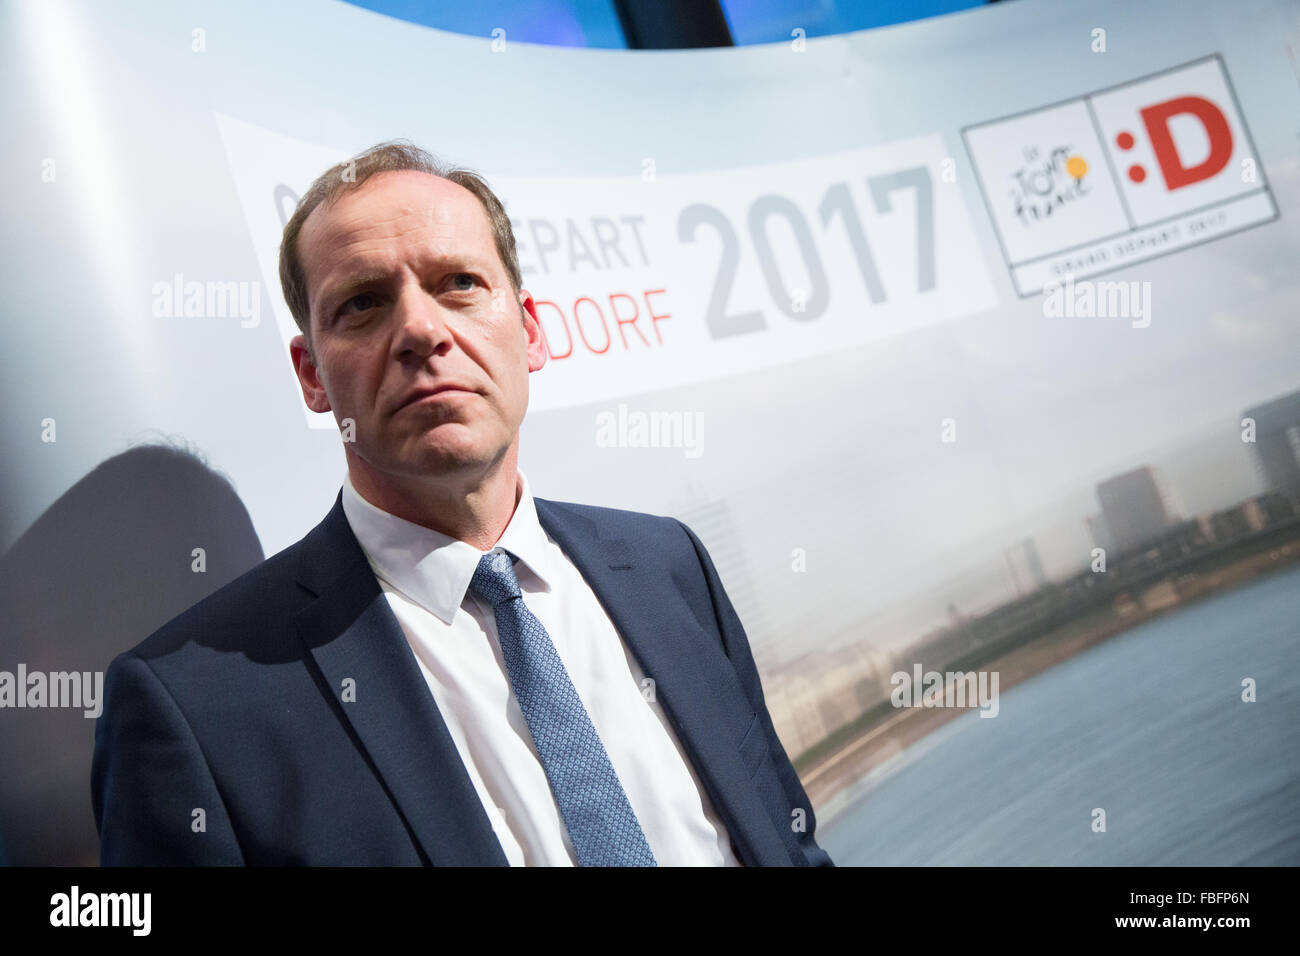 Duesseldorf, Germany. 14th Jan, 2016. Tour director Christian Prudhomme pictured after a press conference on the start of the Tour de France 2017 in Duesseldorf, Germany, 14 January 2016. PHOTO: MAJA HITIJ/DPA/Alamy Live News Stock Photo